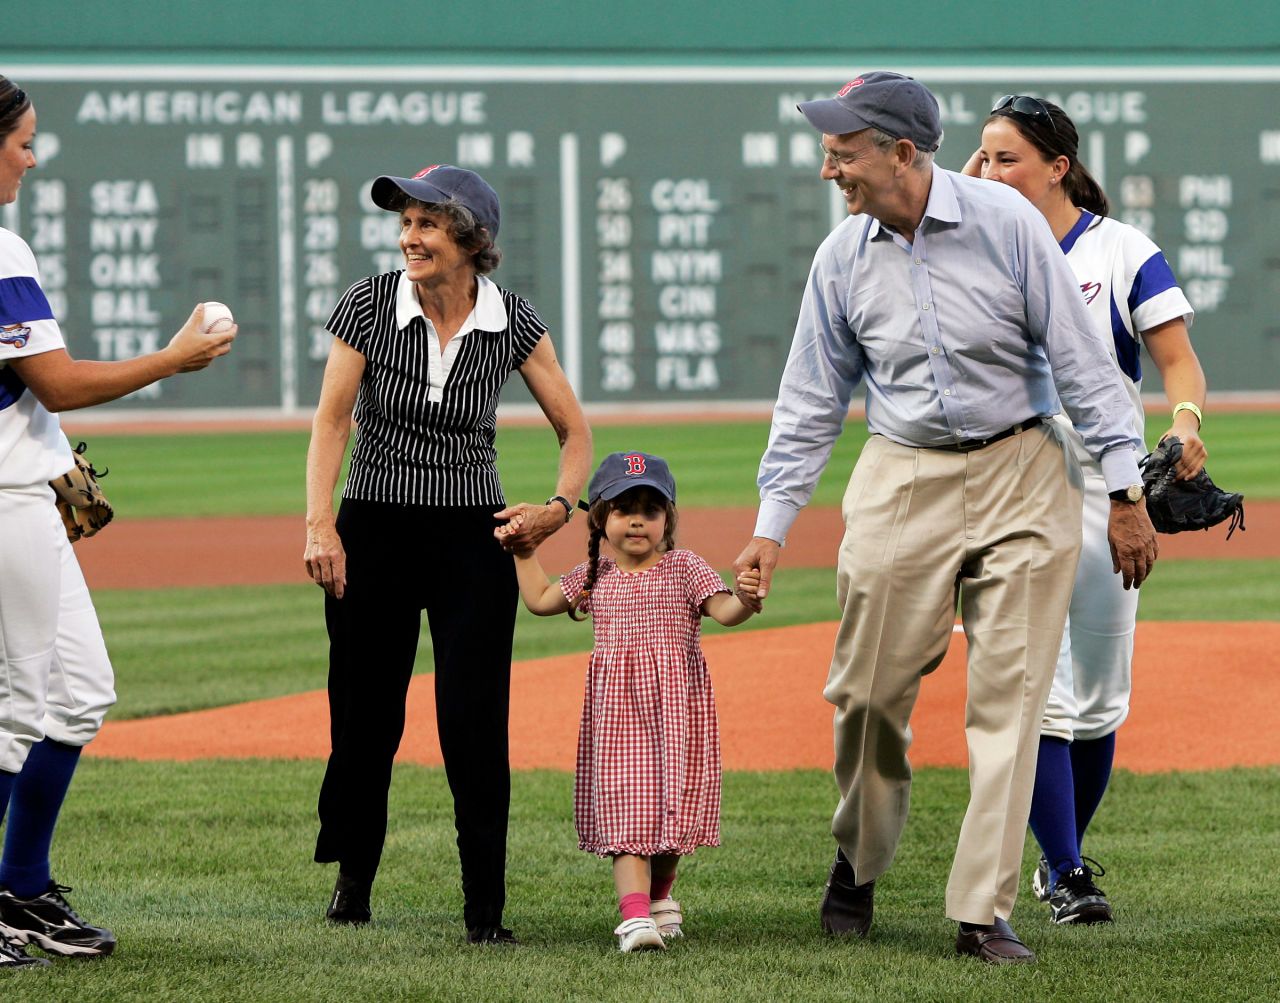 Breyer walks off the field with his wife, Joanna, and their 3-year-old granddaughter, Clara Scholl, after throwing a ceremonial first pitch at Boston's Fenway Park in July 2006.